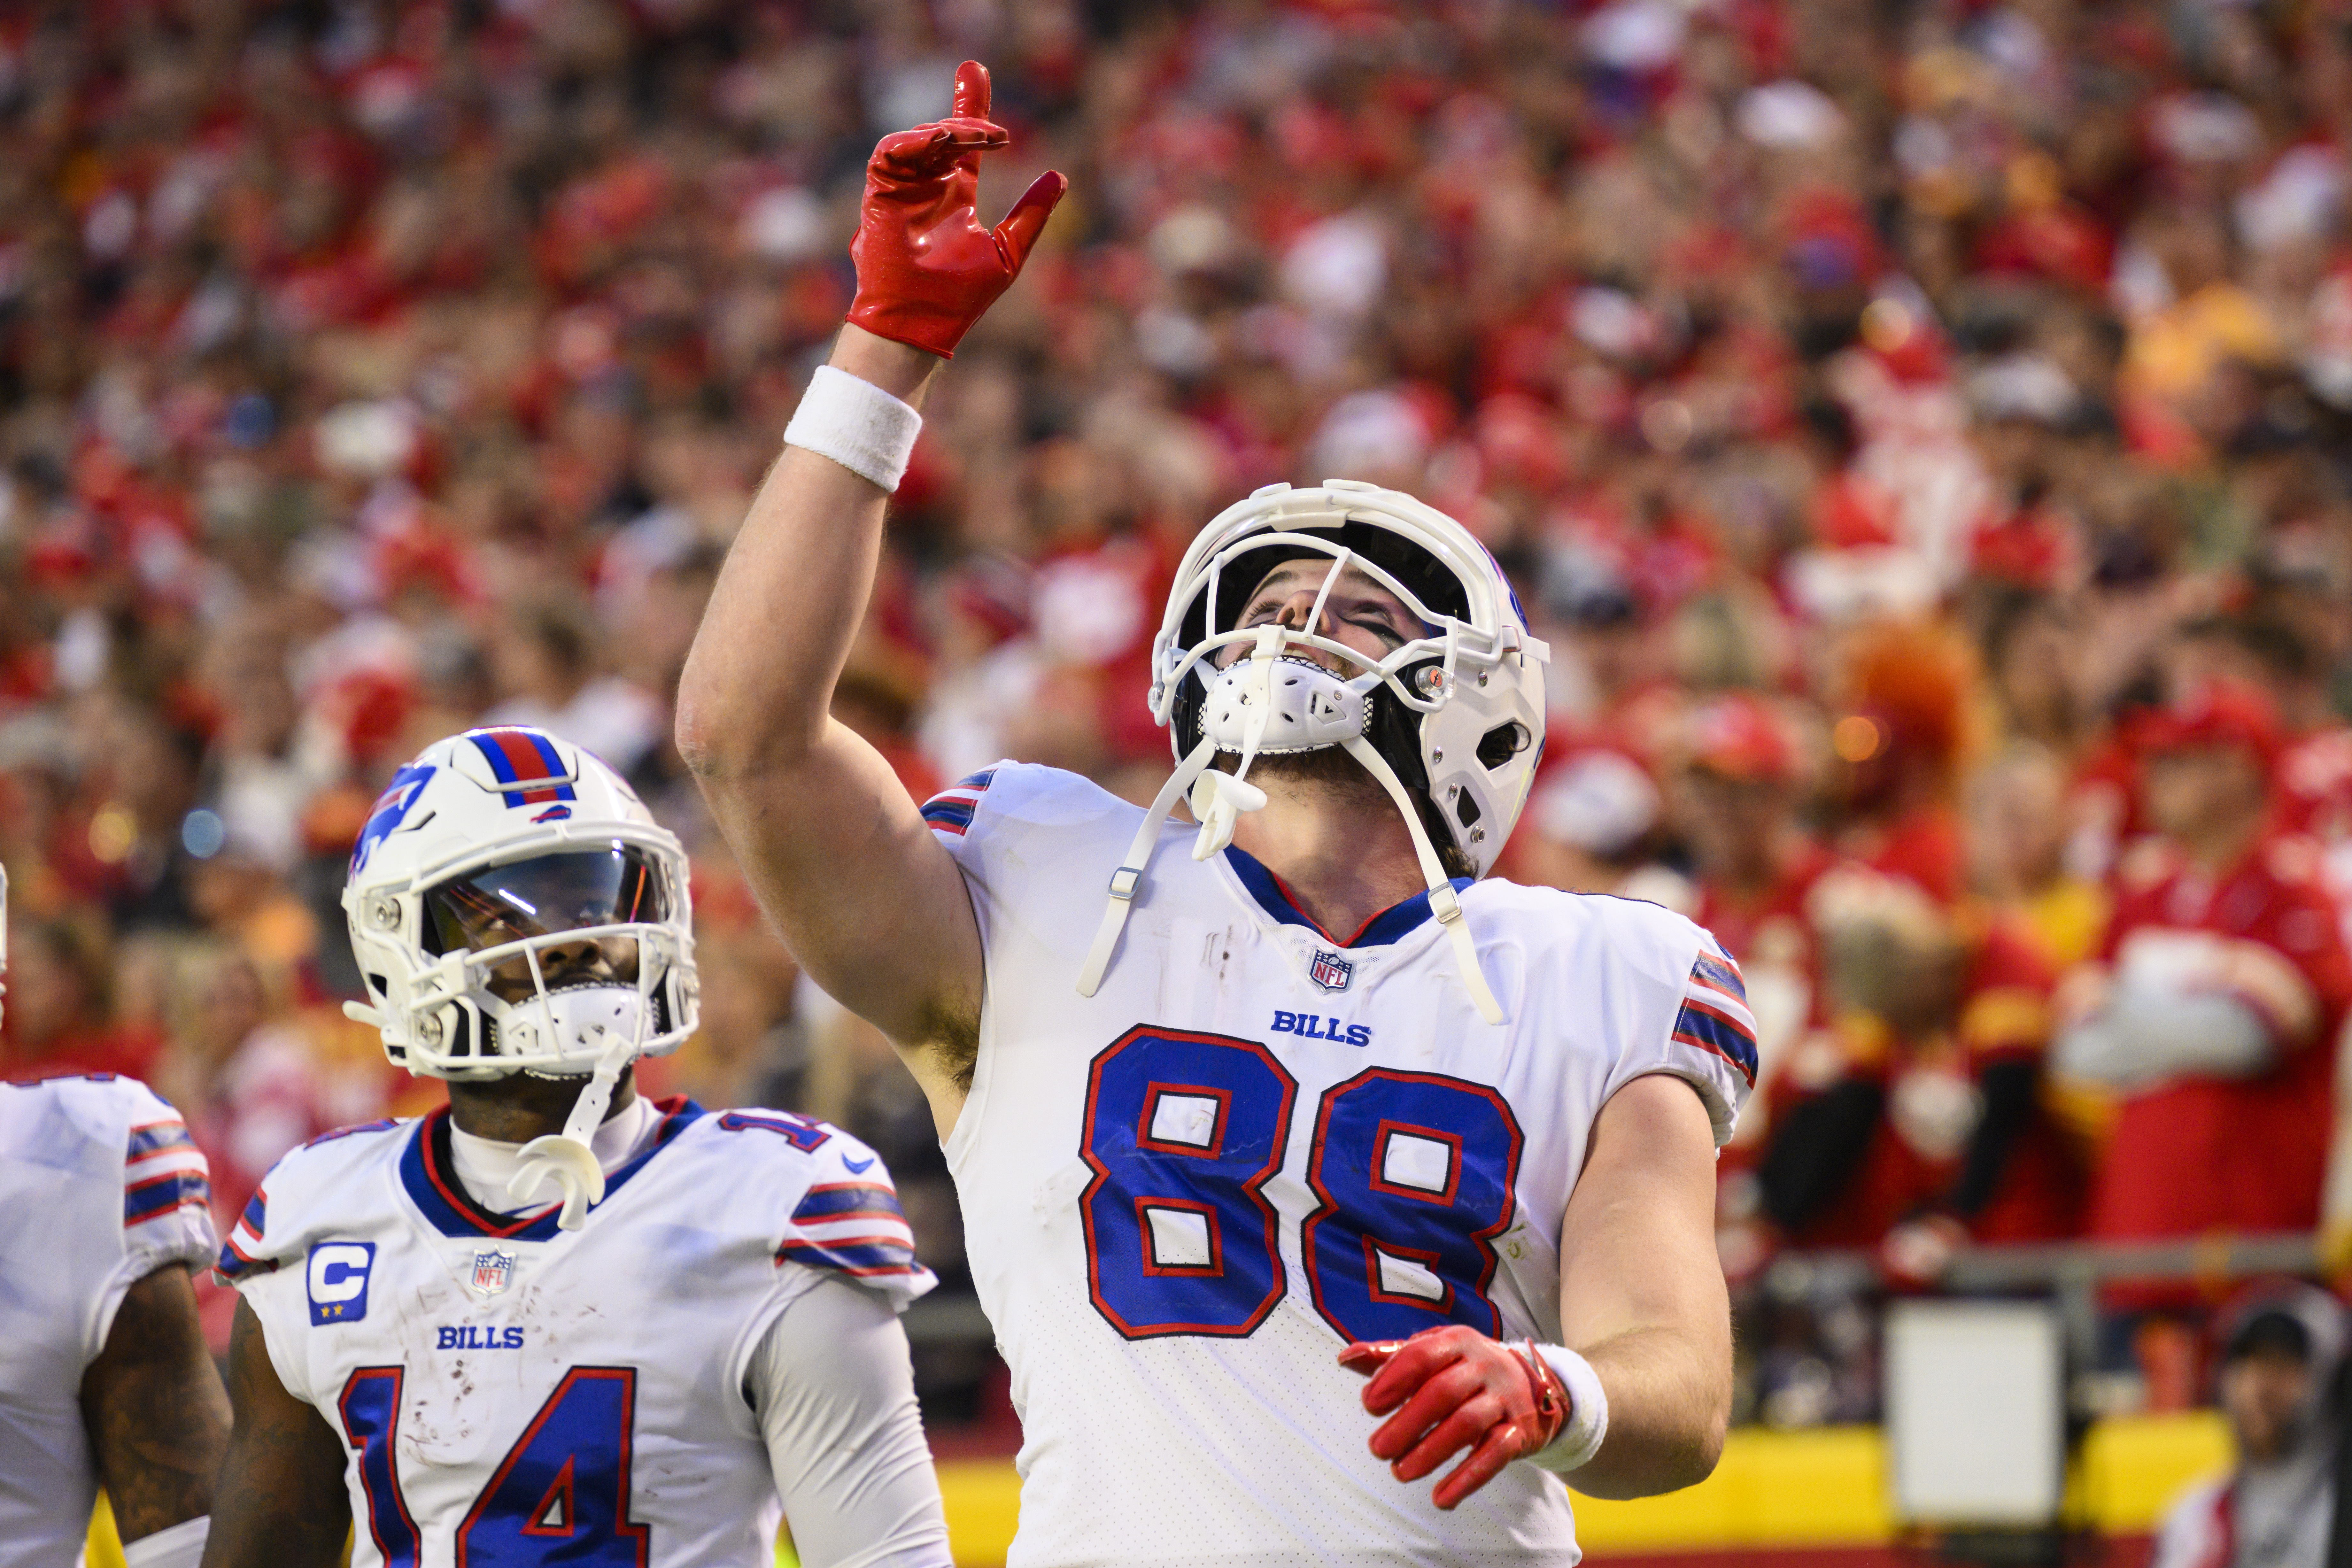 Bills rally to beat Chiefs 24-20 in playoff rematch